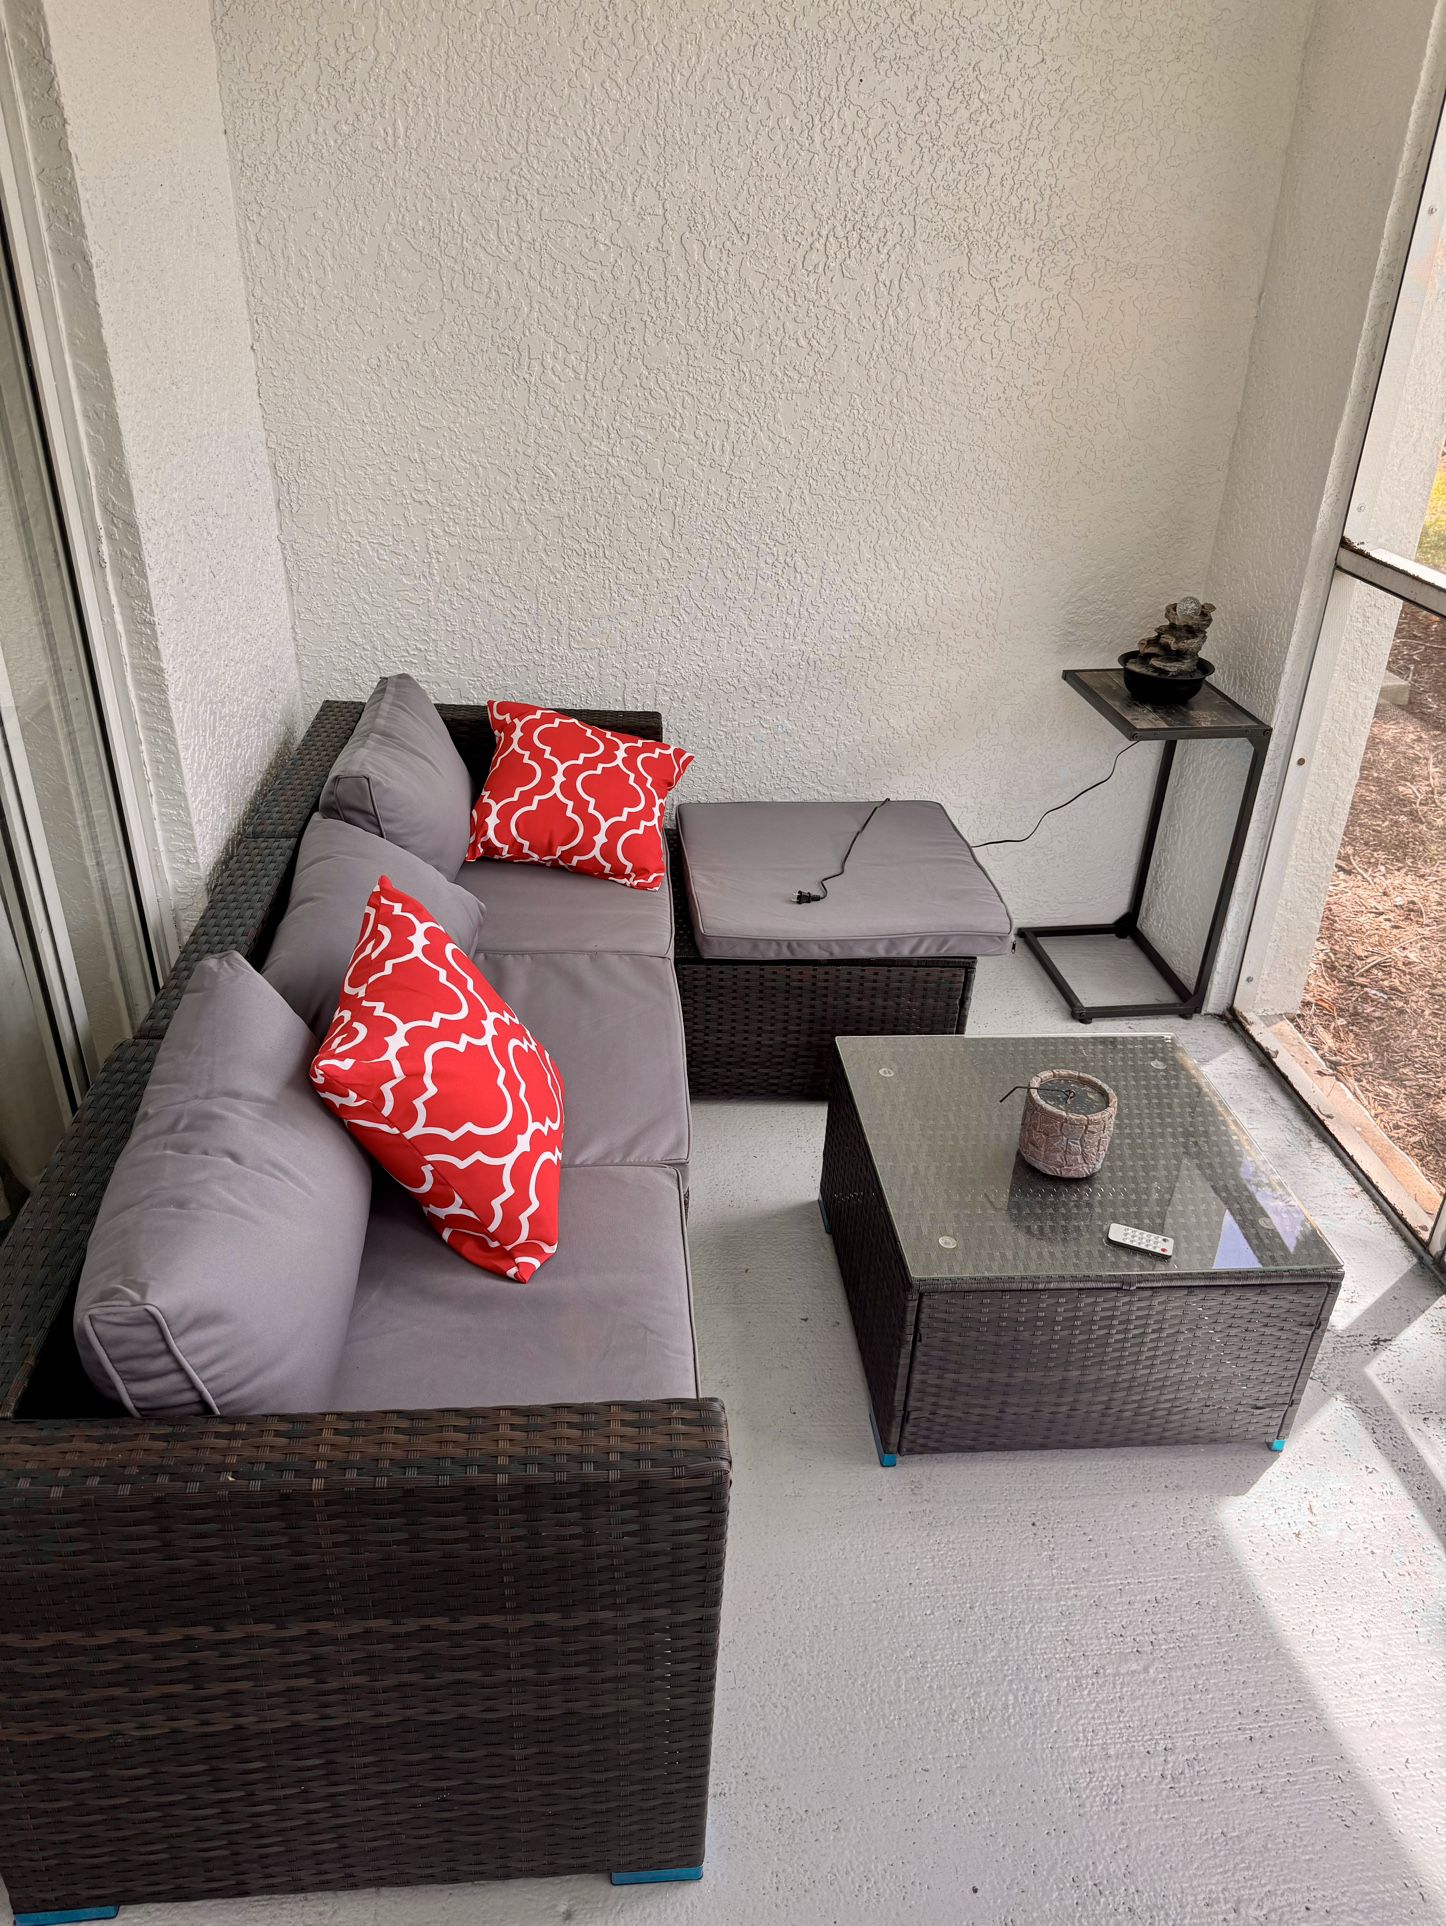 Patio Furniture 2 Months Old Includes Pillows and Table